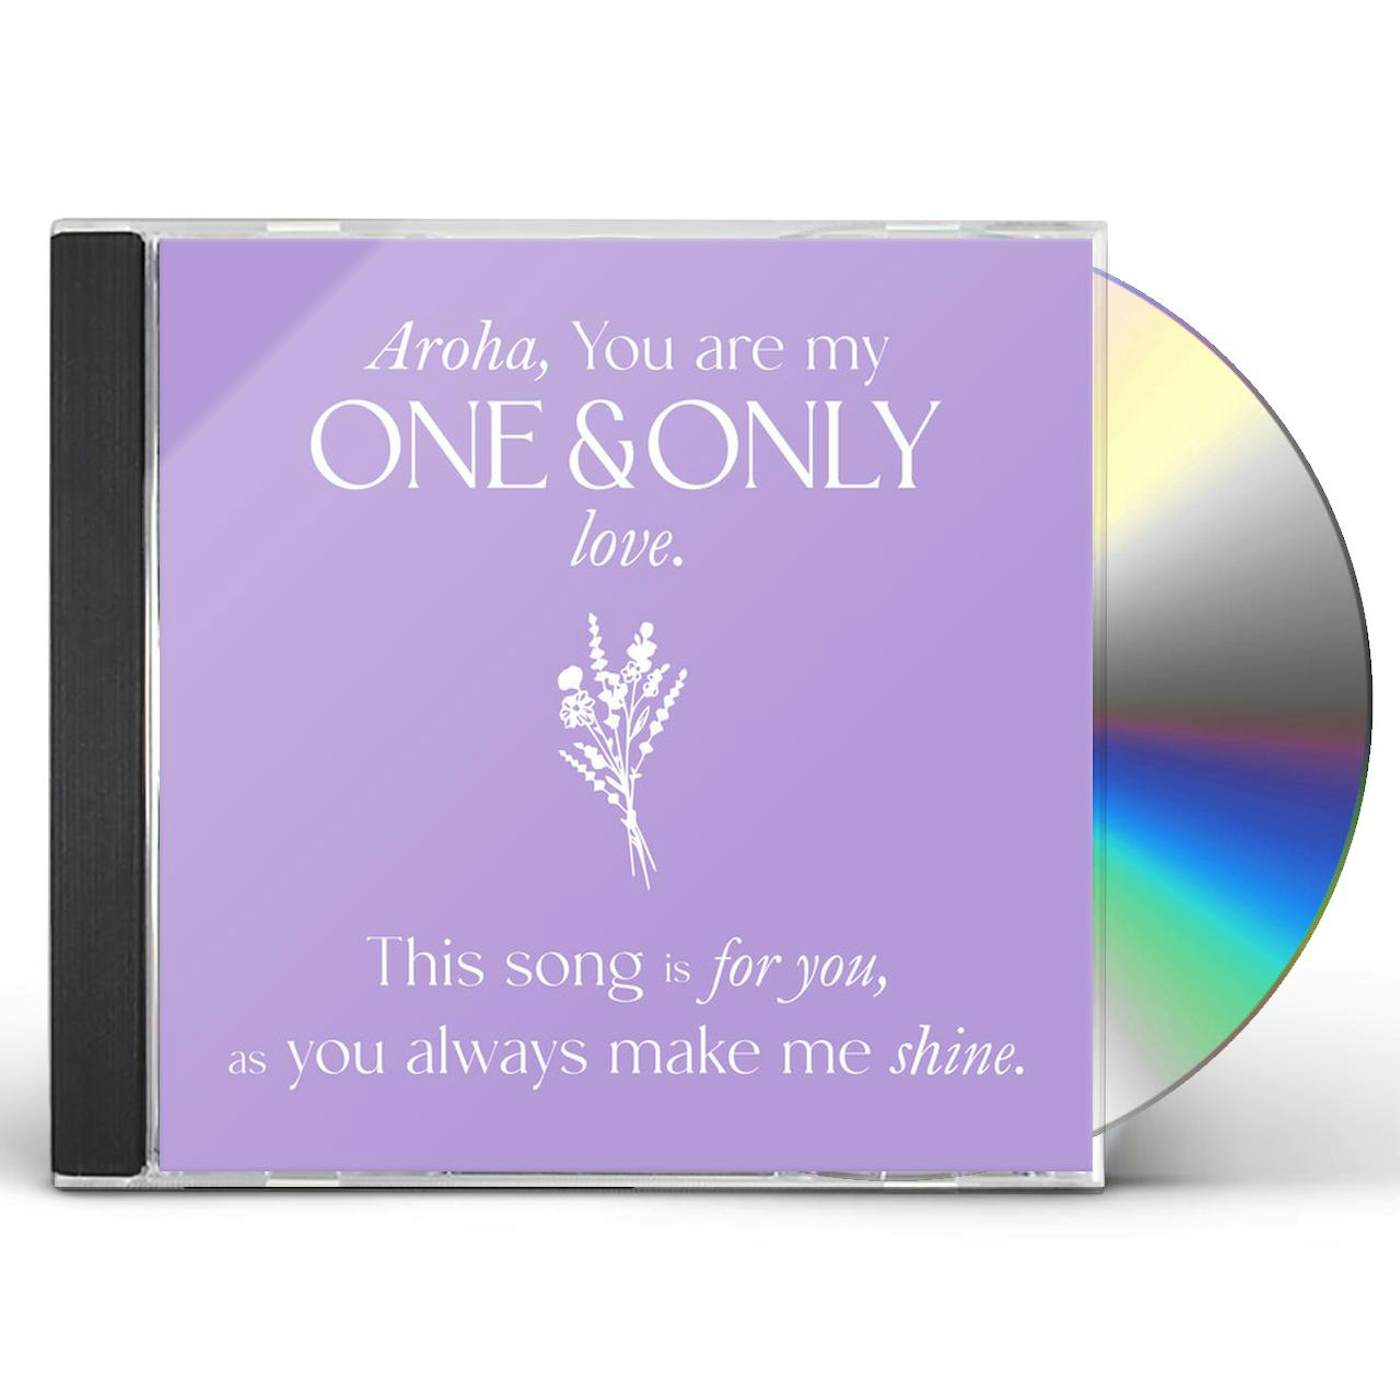 ASTRO ONE & ONLY CD